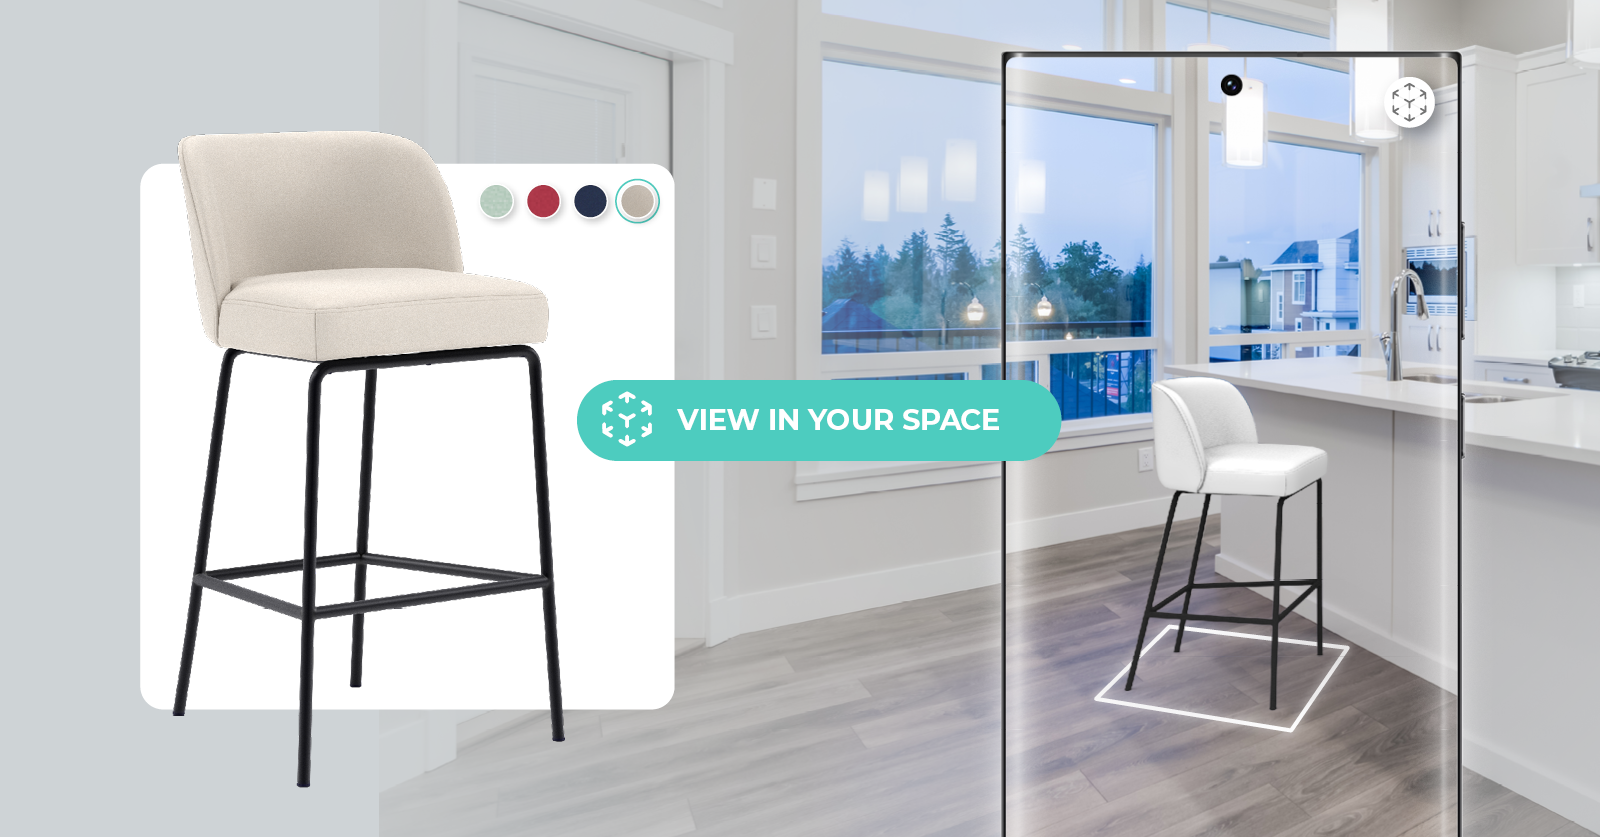 HERO_The What, Why, And How Of Augmented Reality In Furniture Retail